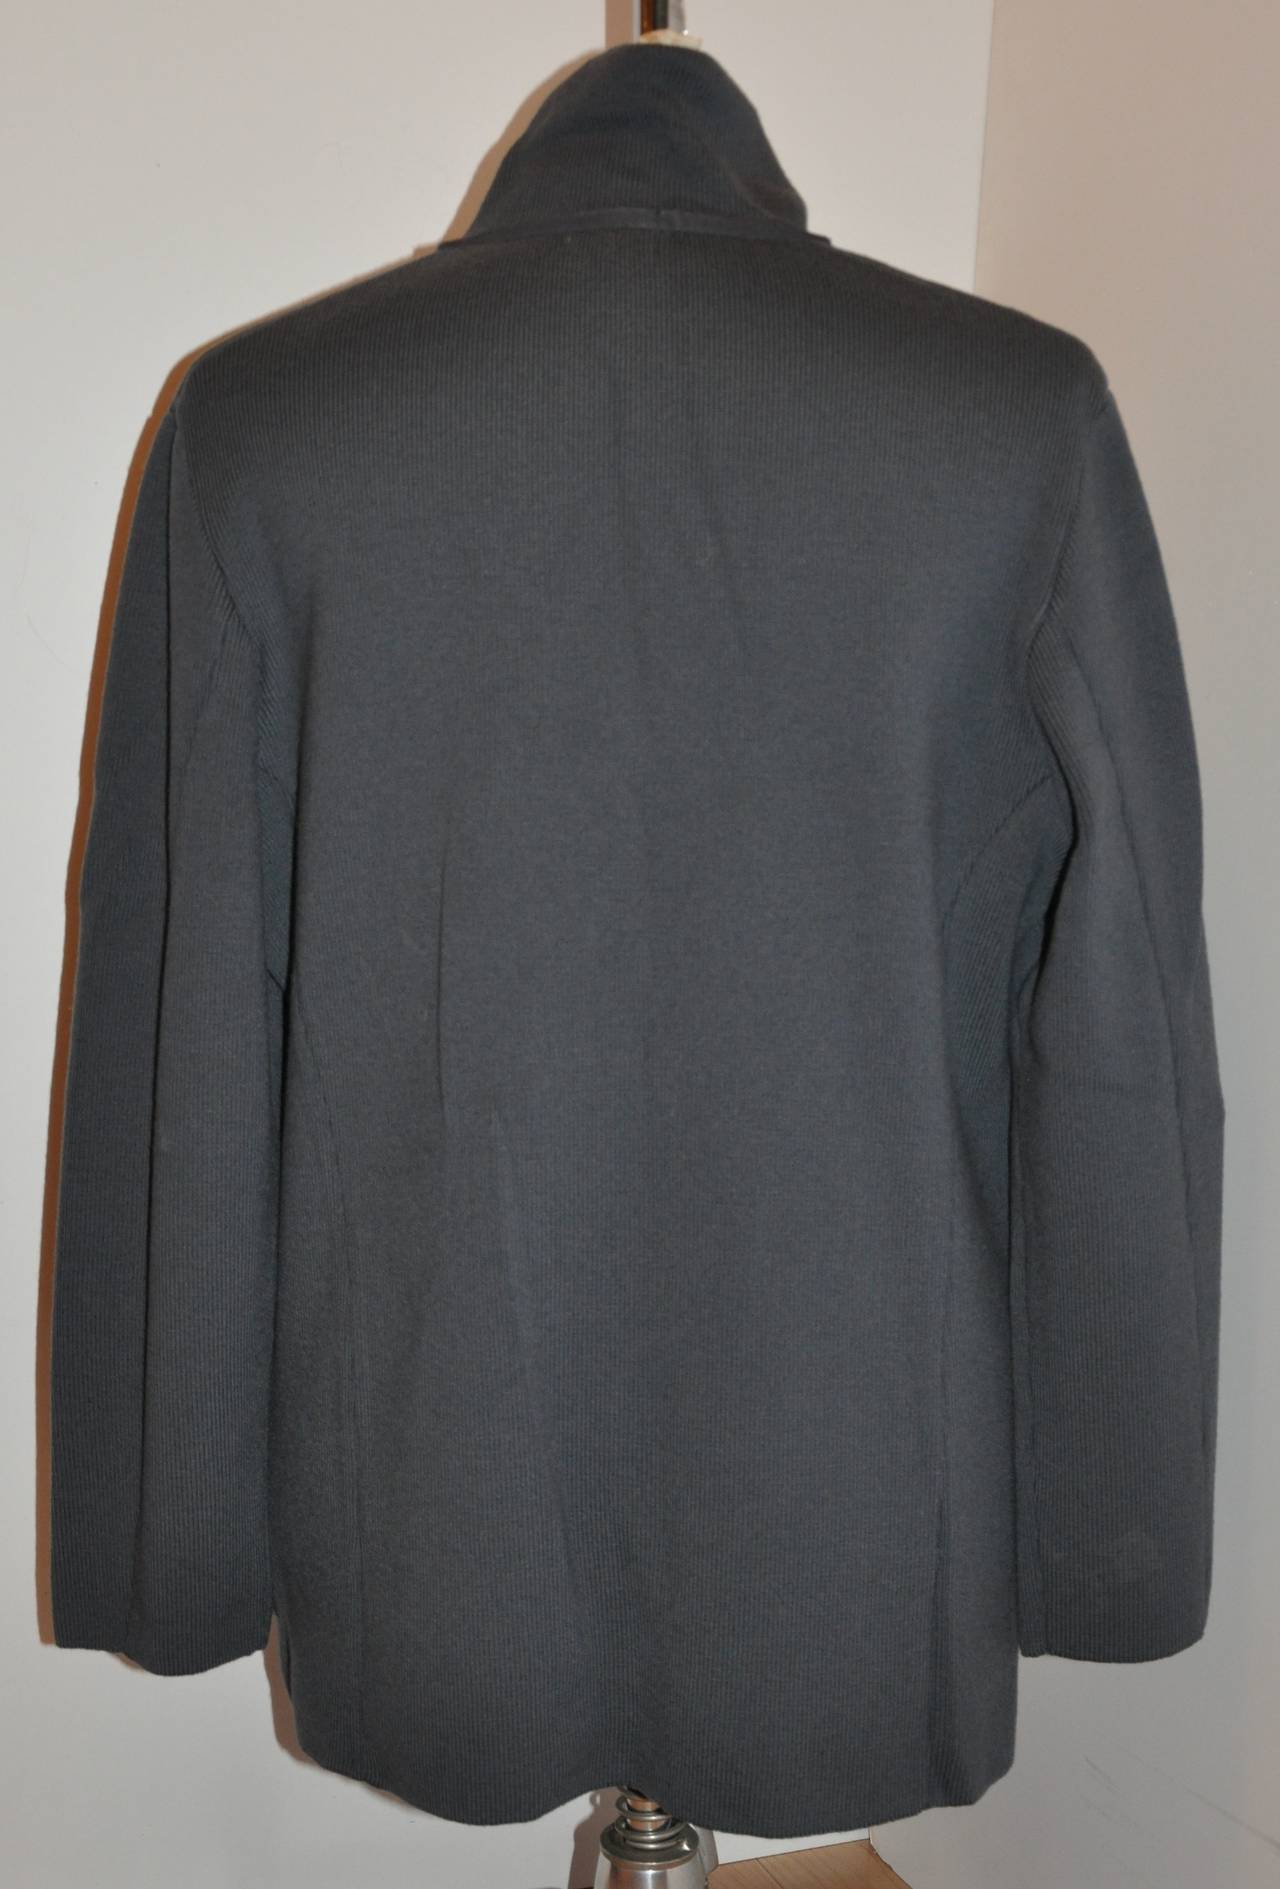 Gianfranco Ferre Men's Gray Sweater Jacket with Patch Pockets For Sale ...